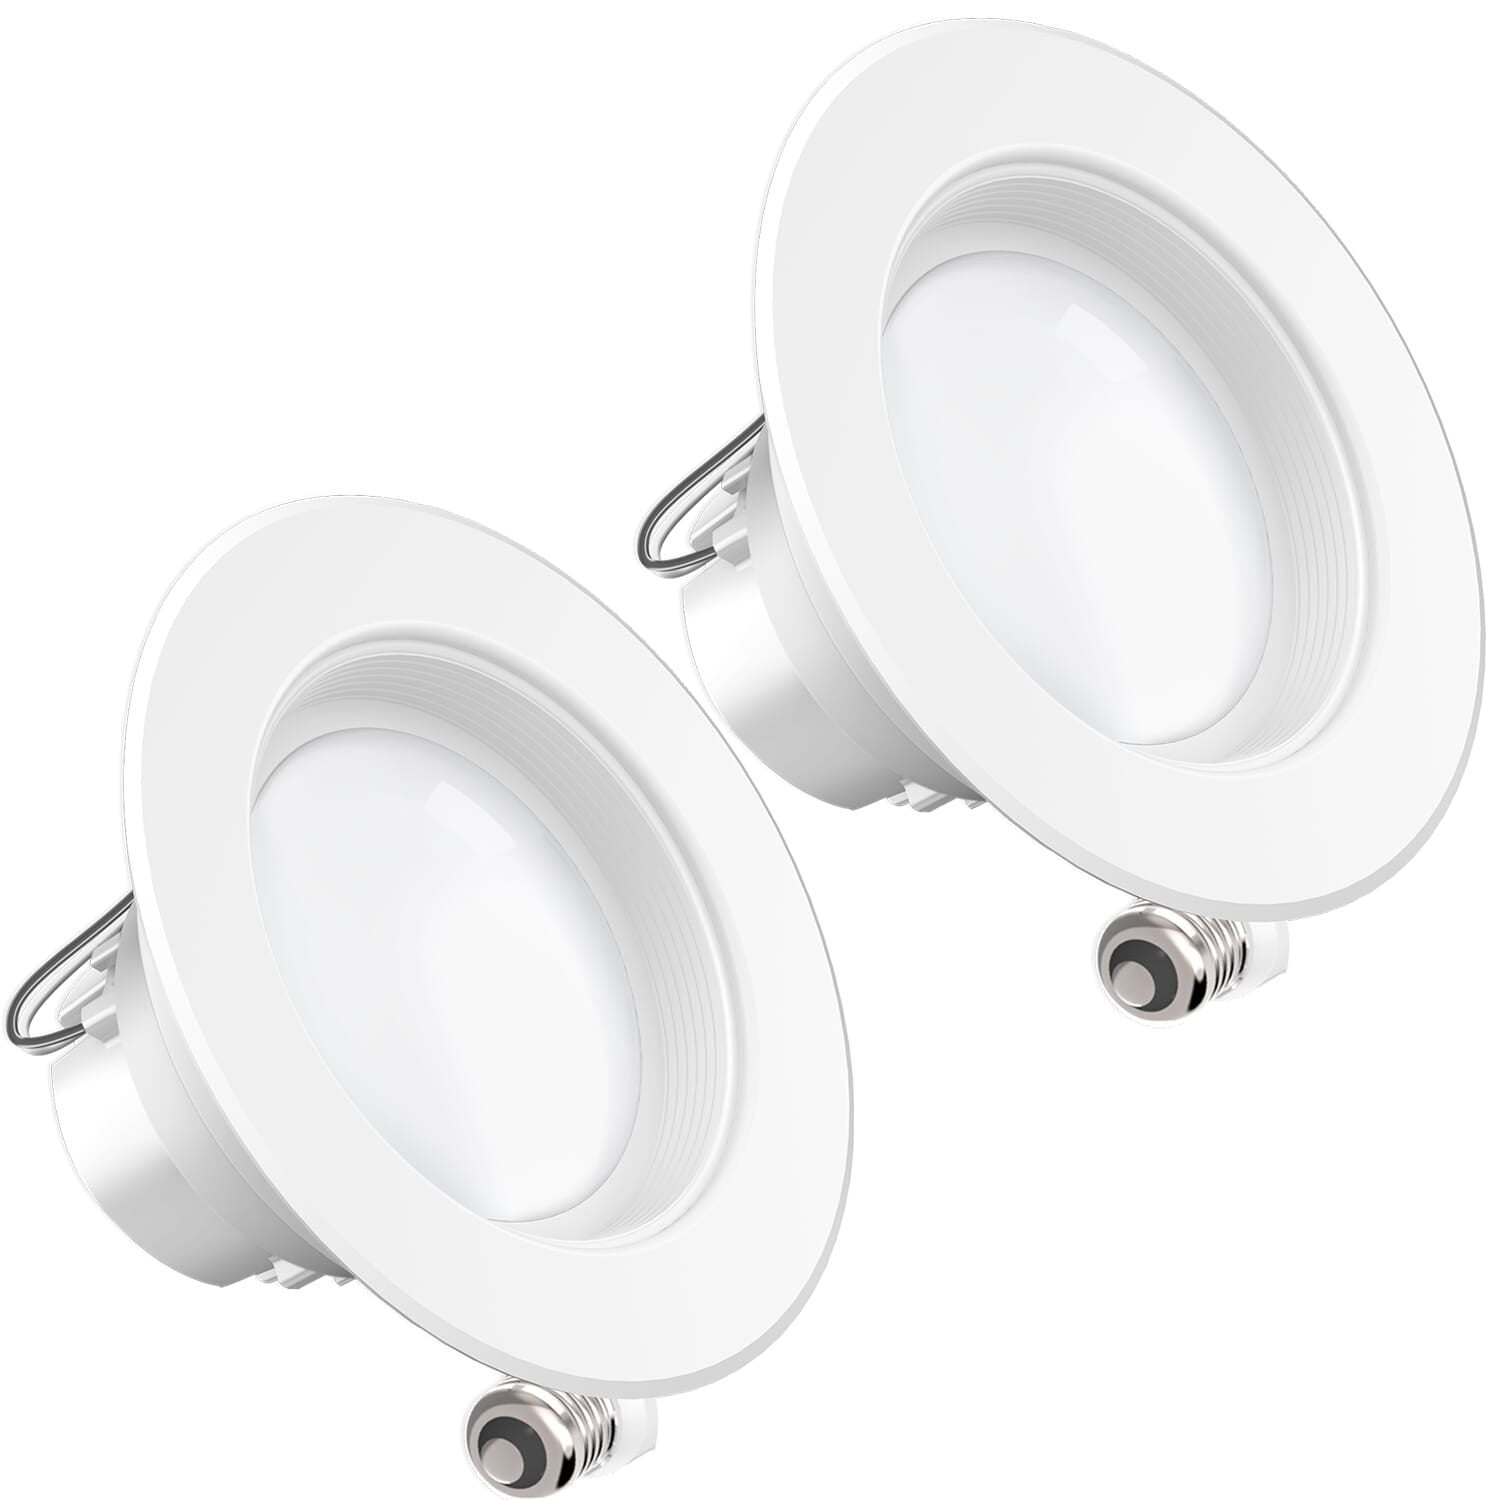 UL 11W=40W Damp Rated 4000K Cool White 660 LM Simple Retrofit Installation Dimmable Energy Star Baffle Trim Sunco Lighting 4 Inch LED Recessed Downlight